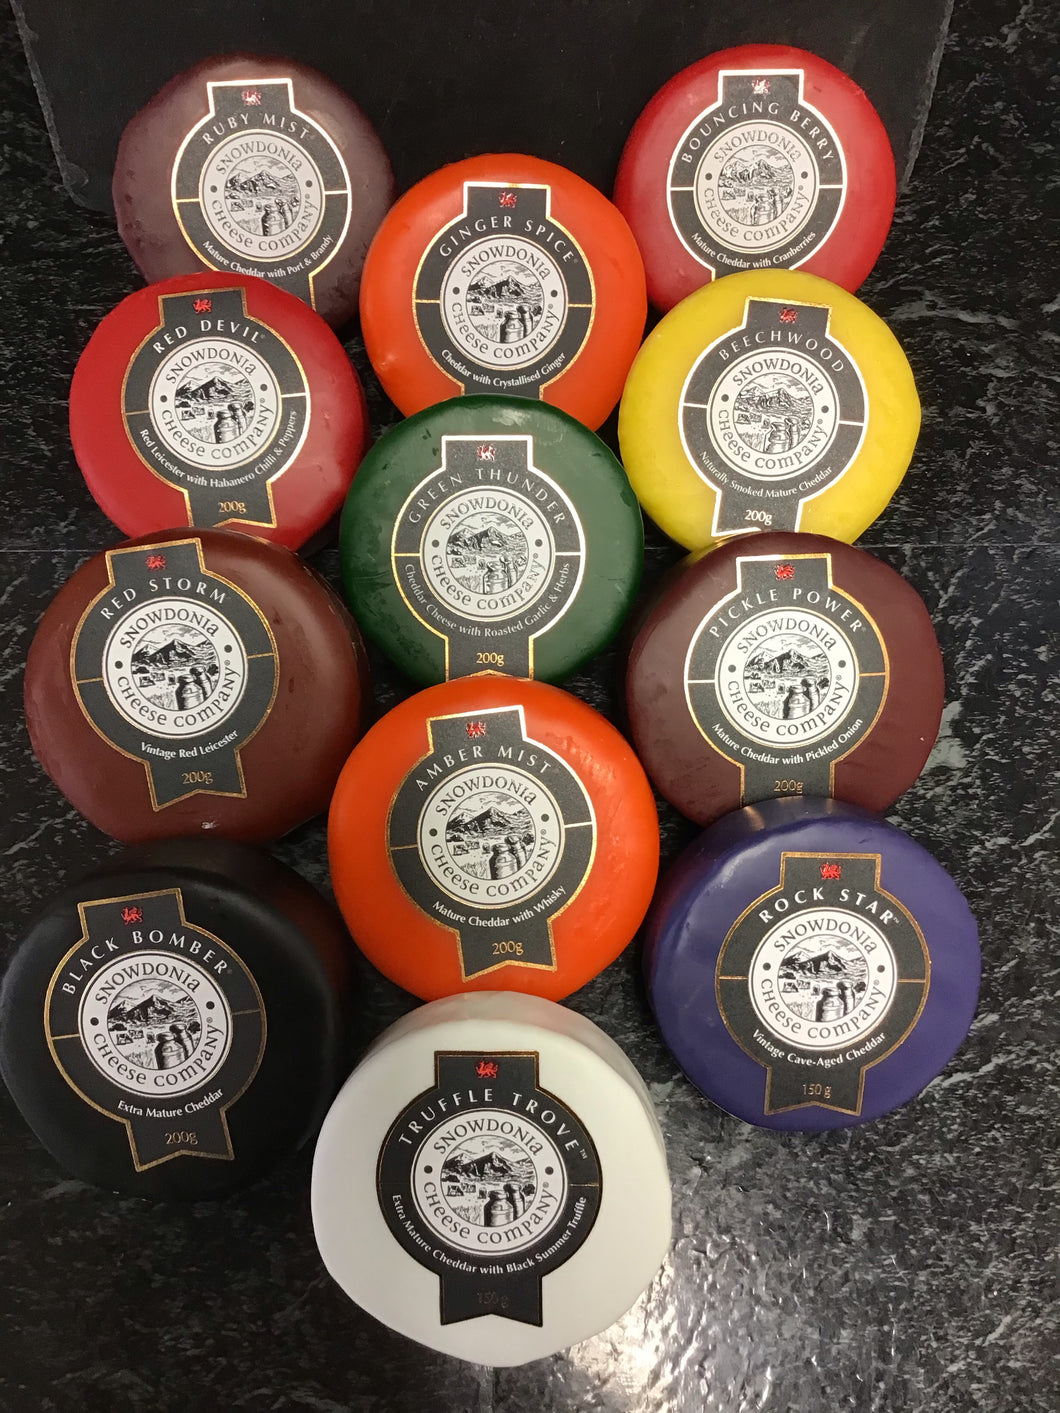 The Snowdonia Cheese Collection